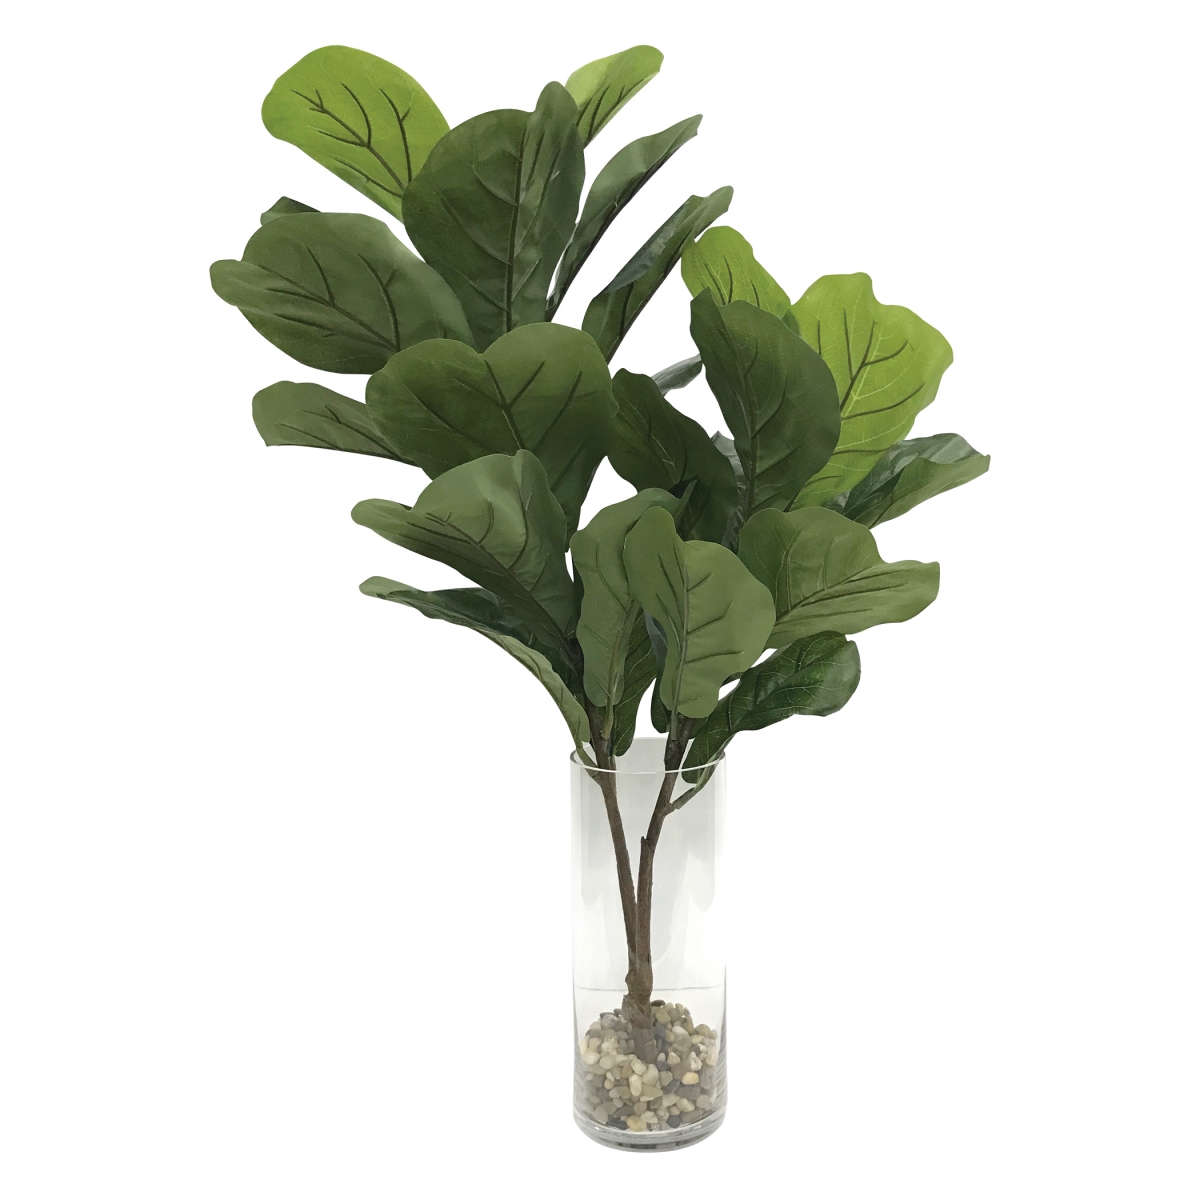 Picture of 212 Main 60164 Urbana Fiddle Leaf Fig Plant